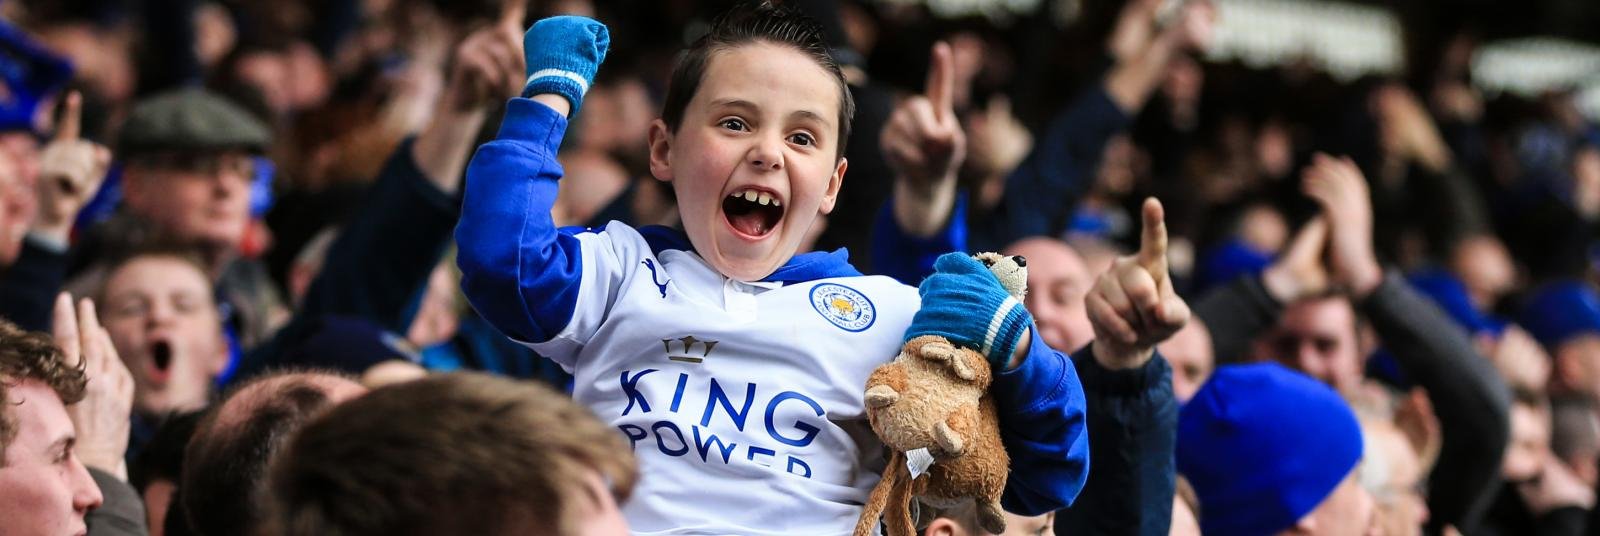 Premier League Round-Up: Leicester City leap seven points clear, Tottenham held at Liverpool whilst Chelsea and Man City score four